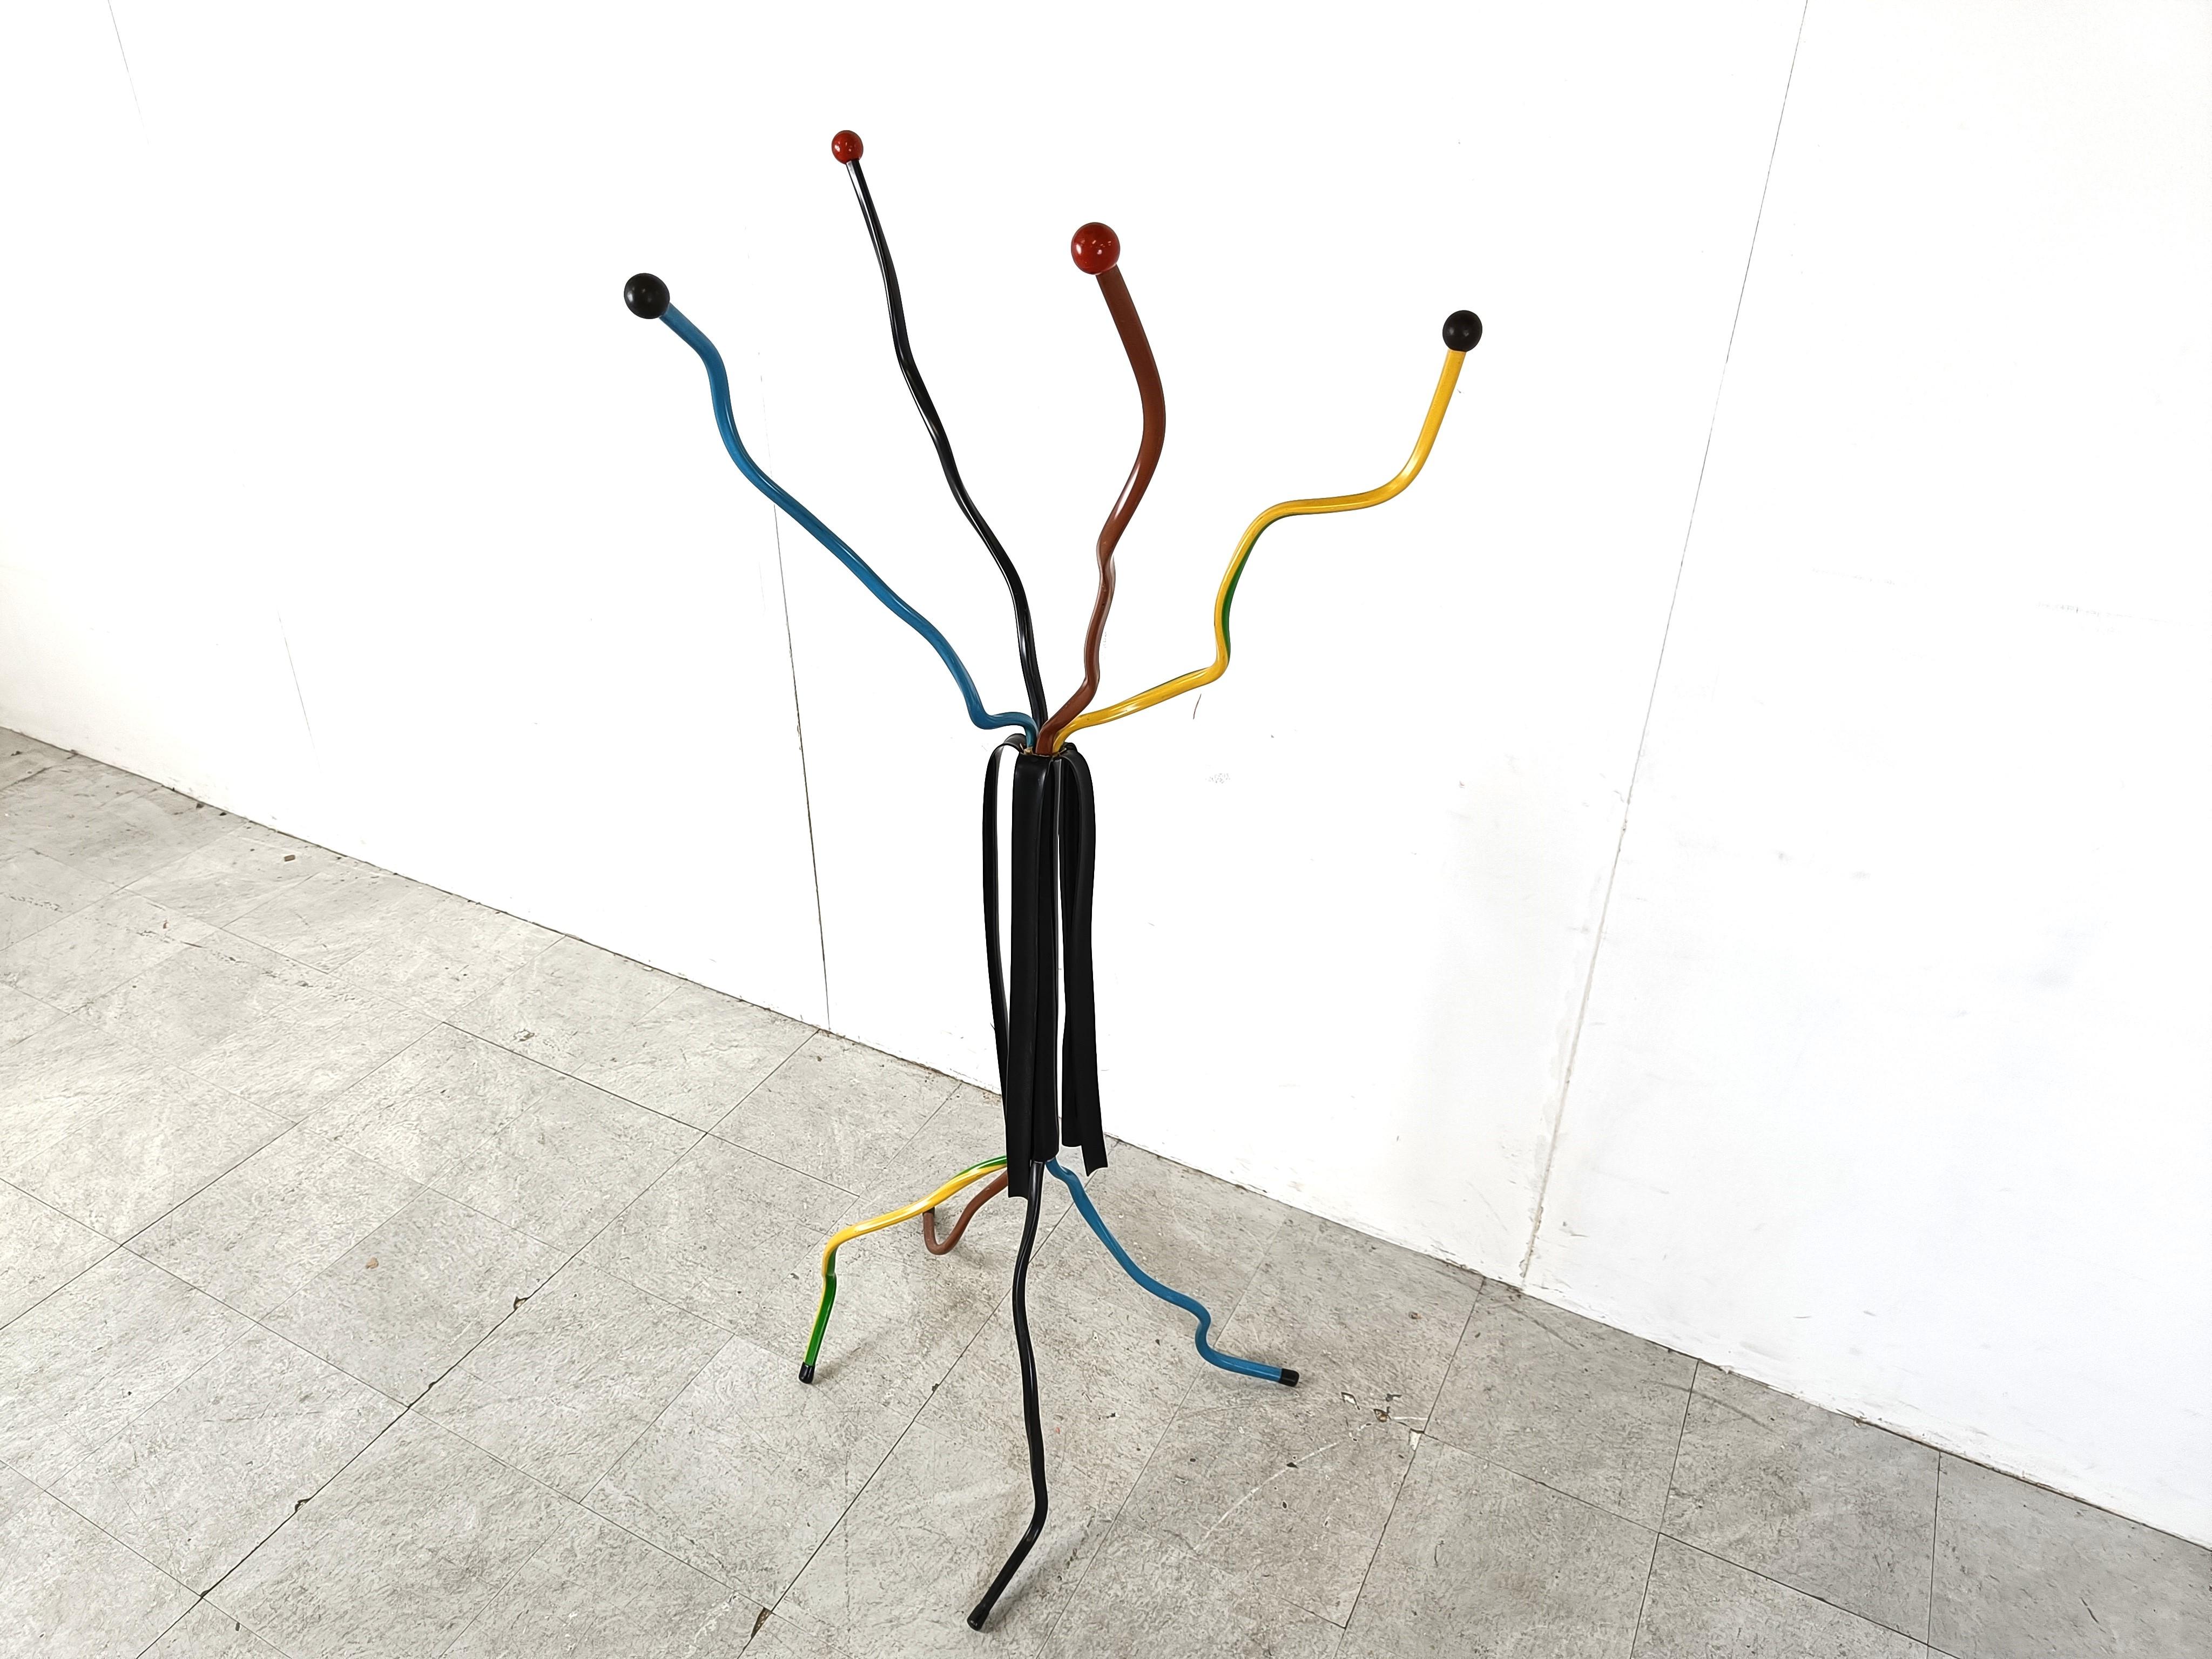 Very unique coat stand designed after a stripped wire.

Very well made and very well thought out.

The arms are adjustable

A unique gift idea for an electrician or someone that loves design

1990s - Belgium

Dimensions:
Height: